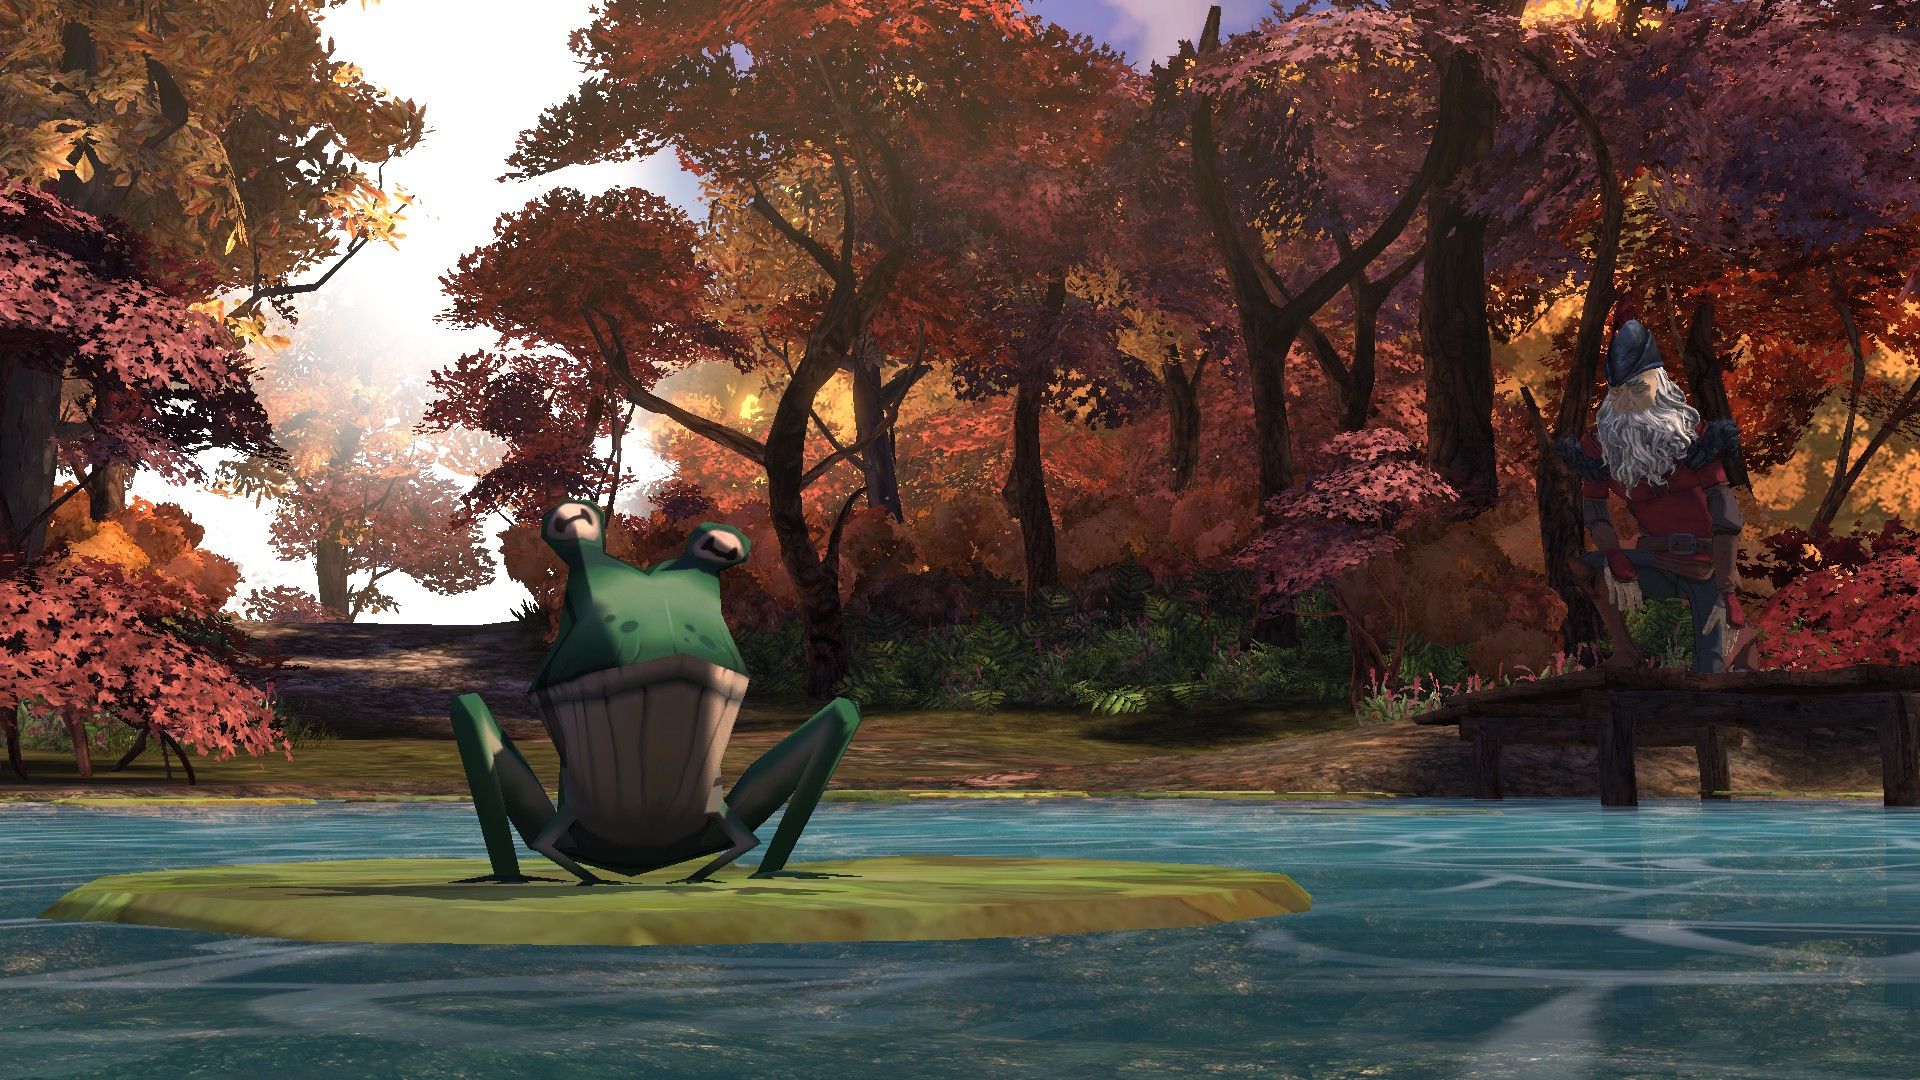 kings-quest-chapter-5-the-good-knight-screenshot-04